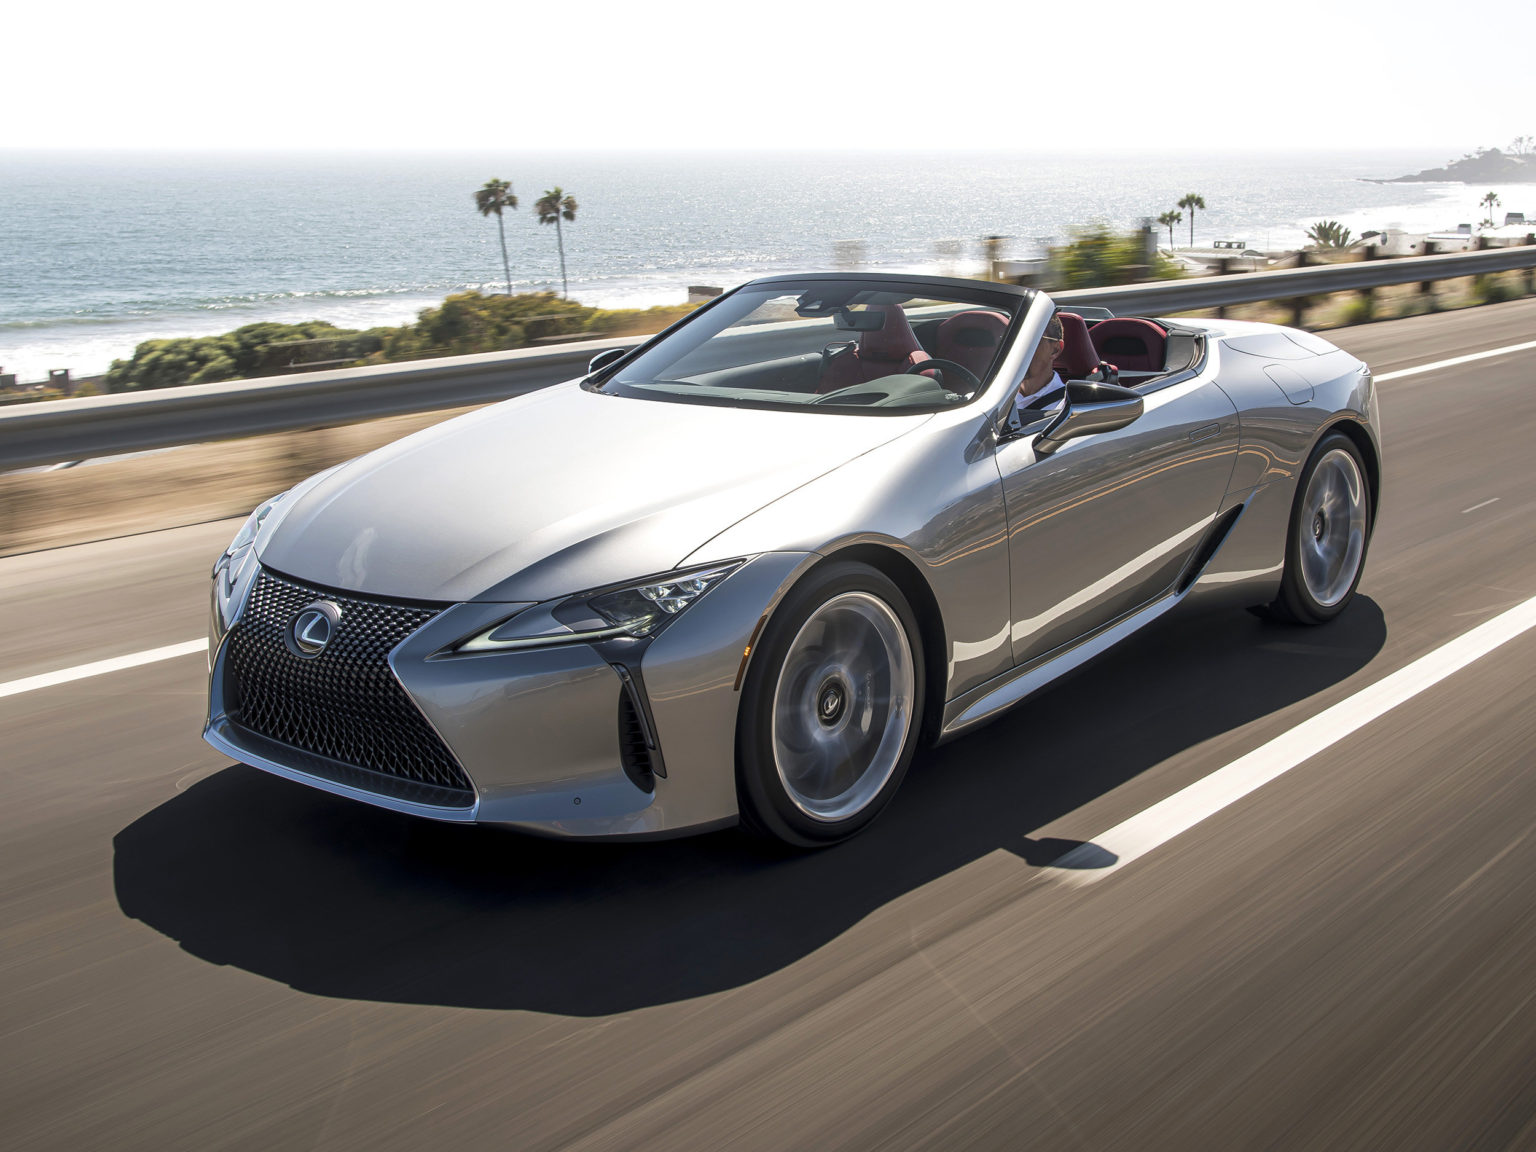 The front of the LC Convertible is very similar to the front of the LC Coupe.